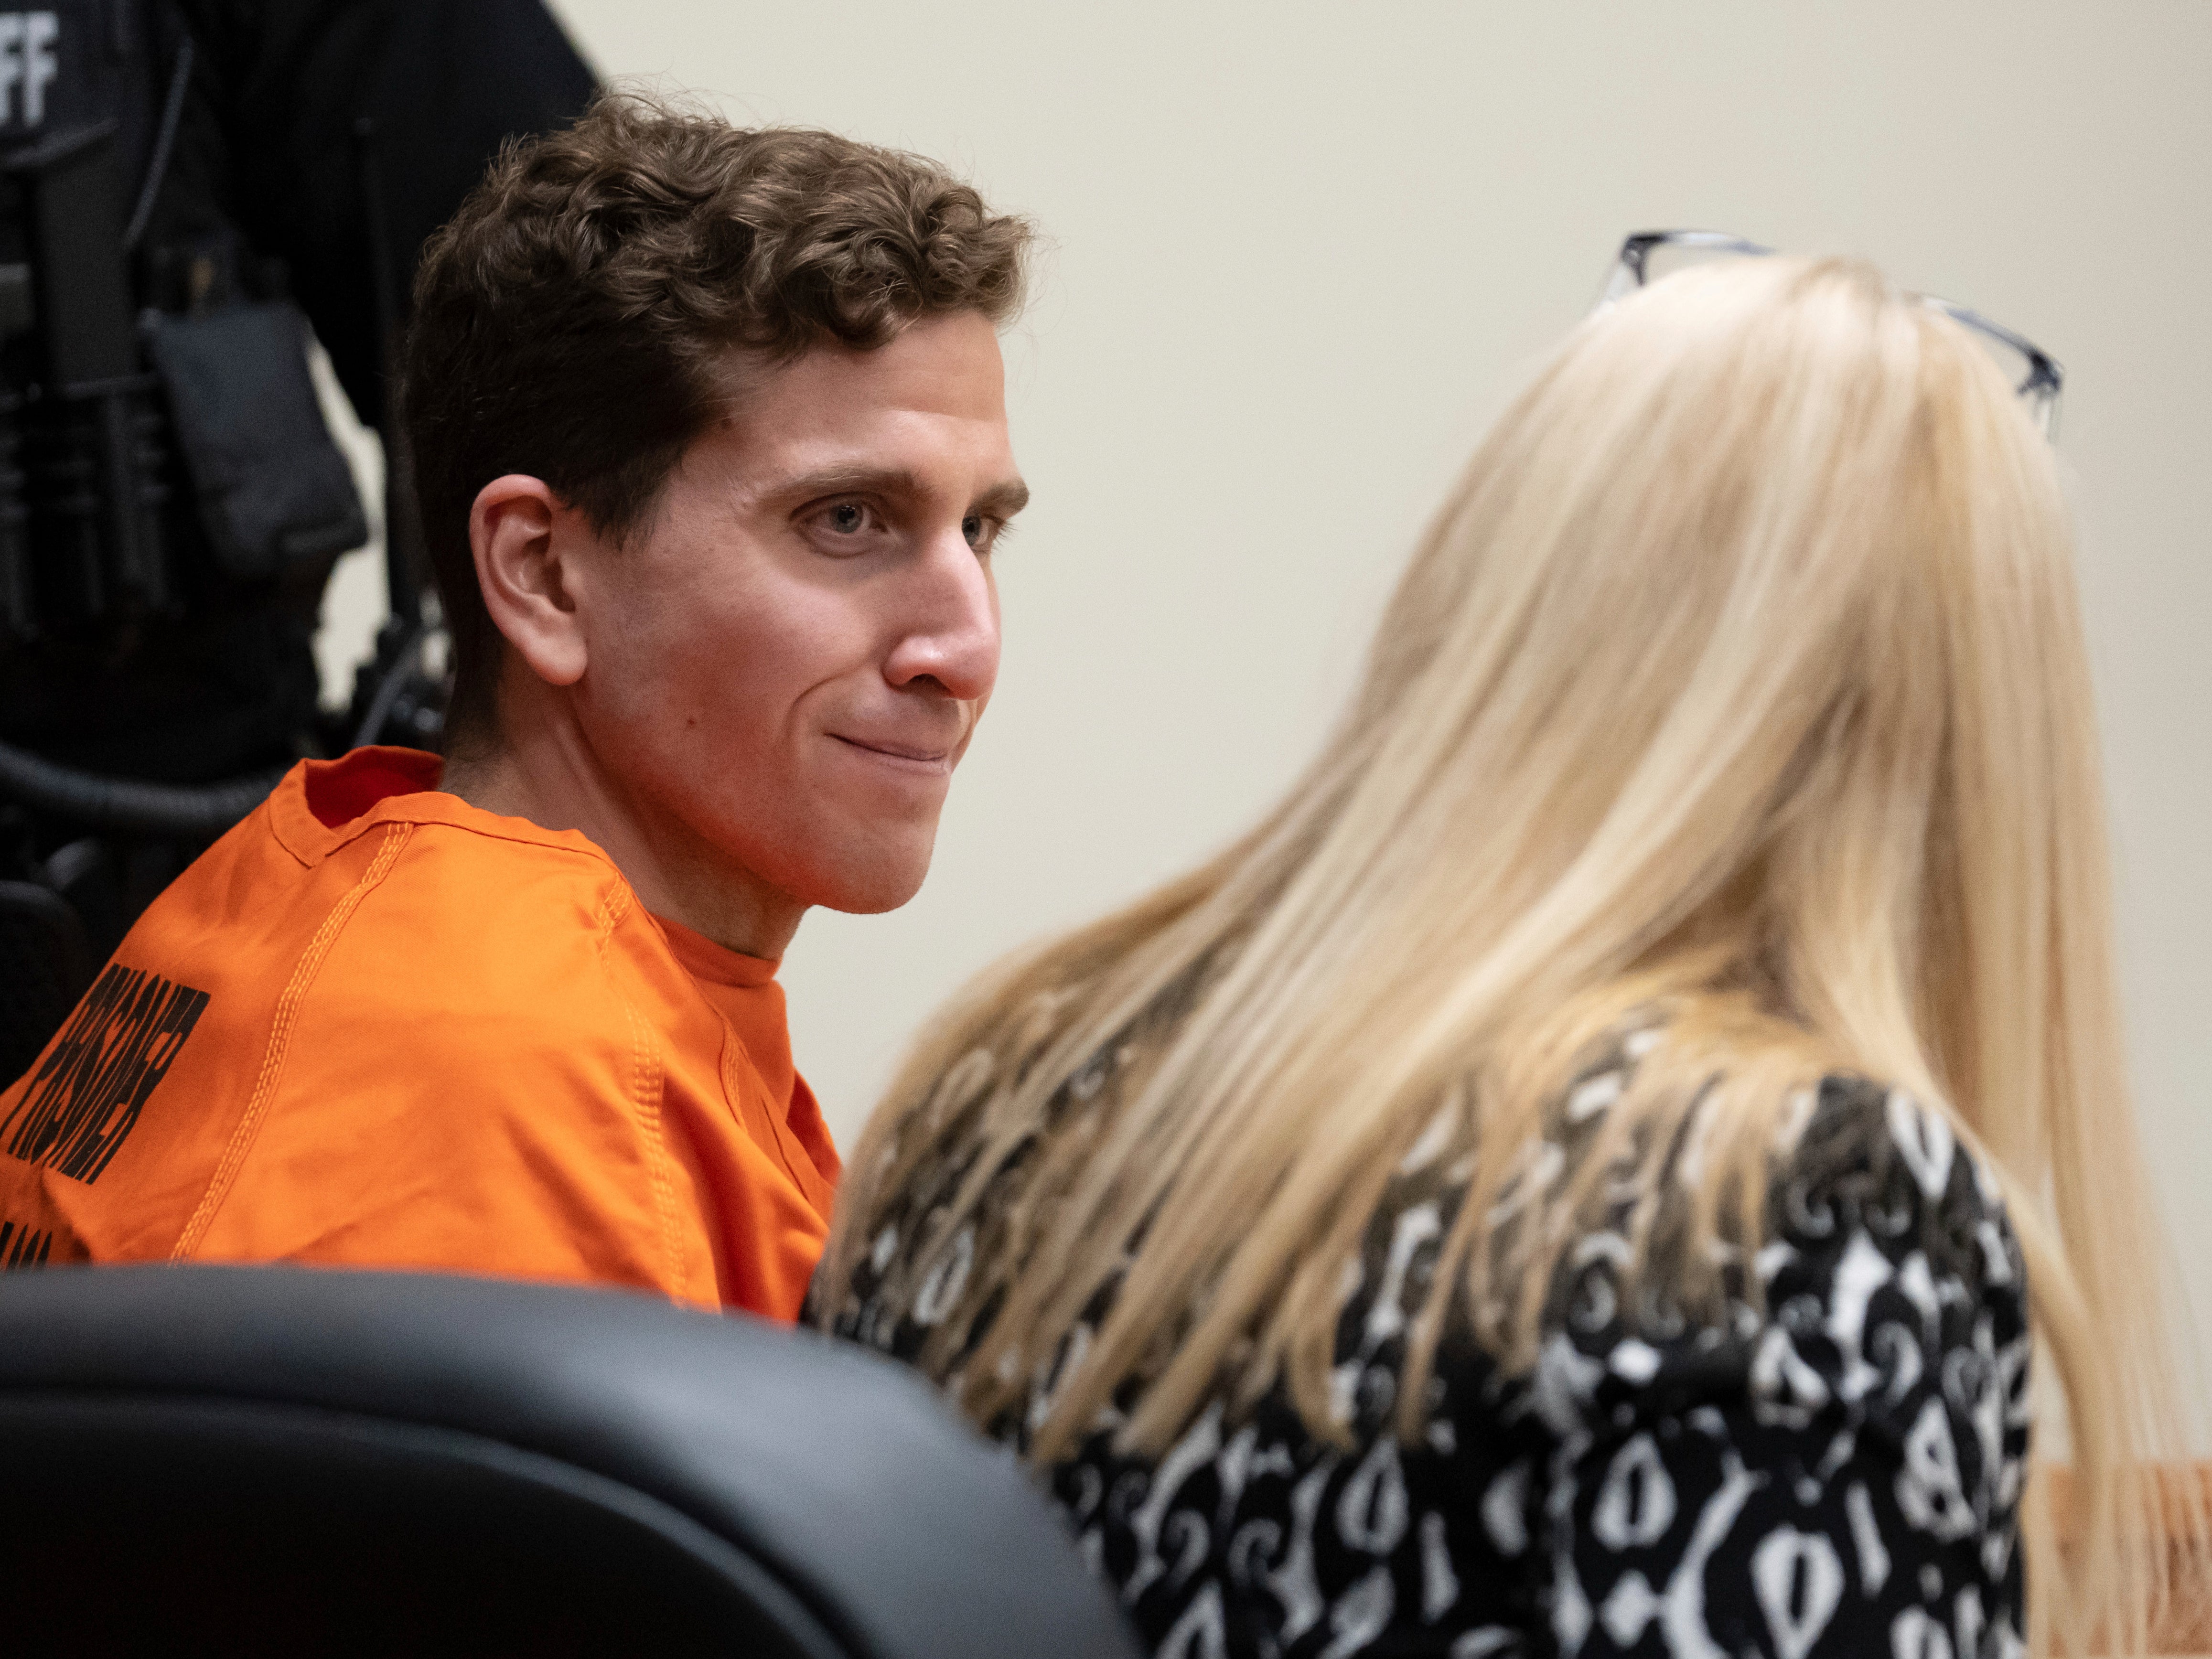 Bryan Kohberger, left, who is accused of killing four University of Idaho students in November 2022, looks toward his attorney, public defender Anne Taylor, right, during a hearing in Latah County District Court on Thursday